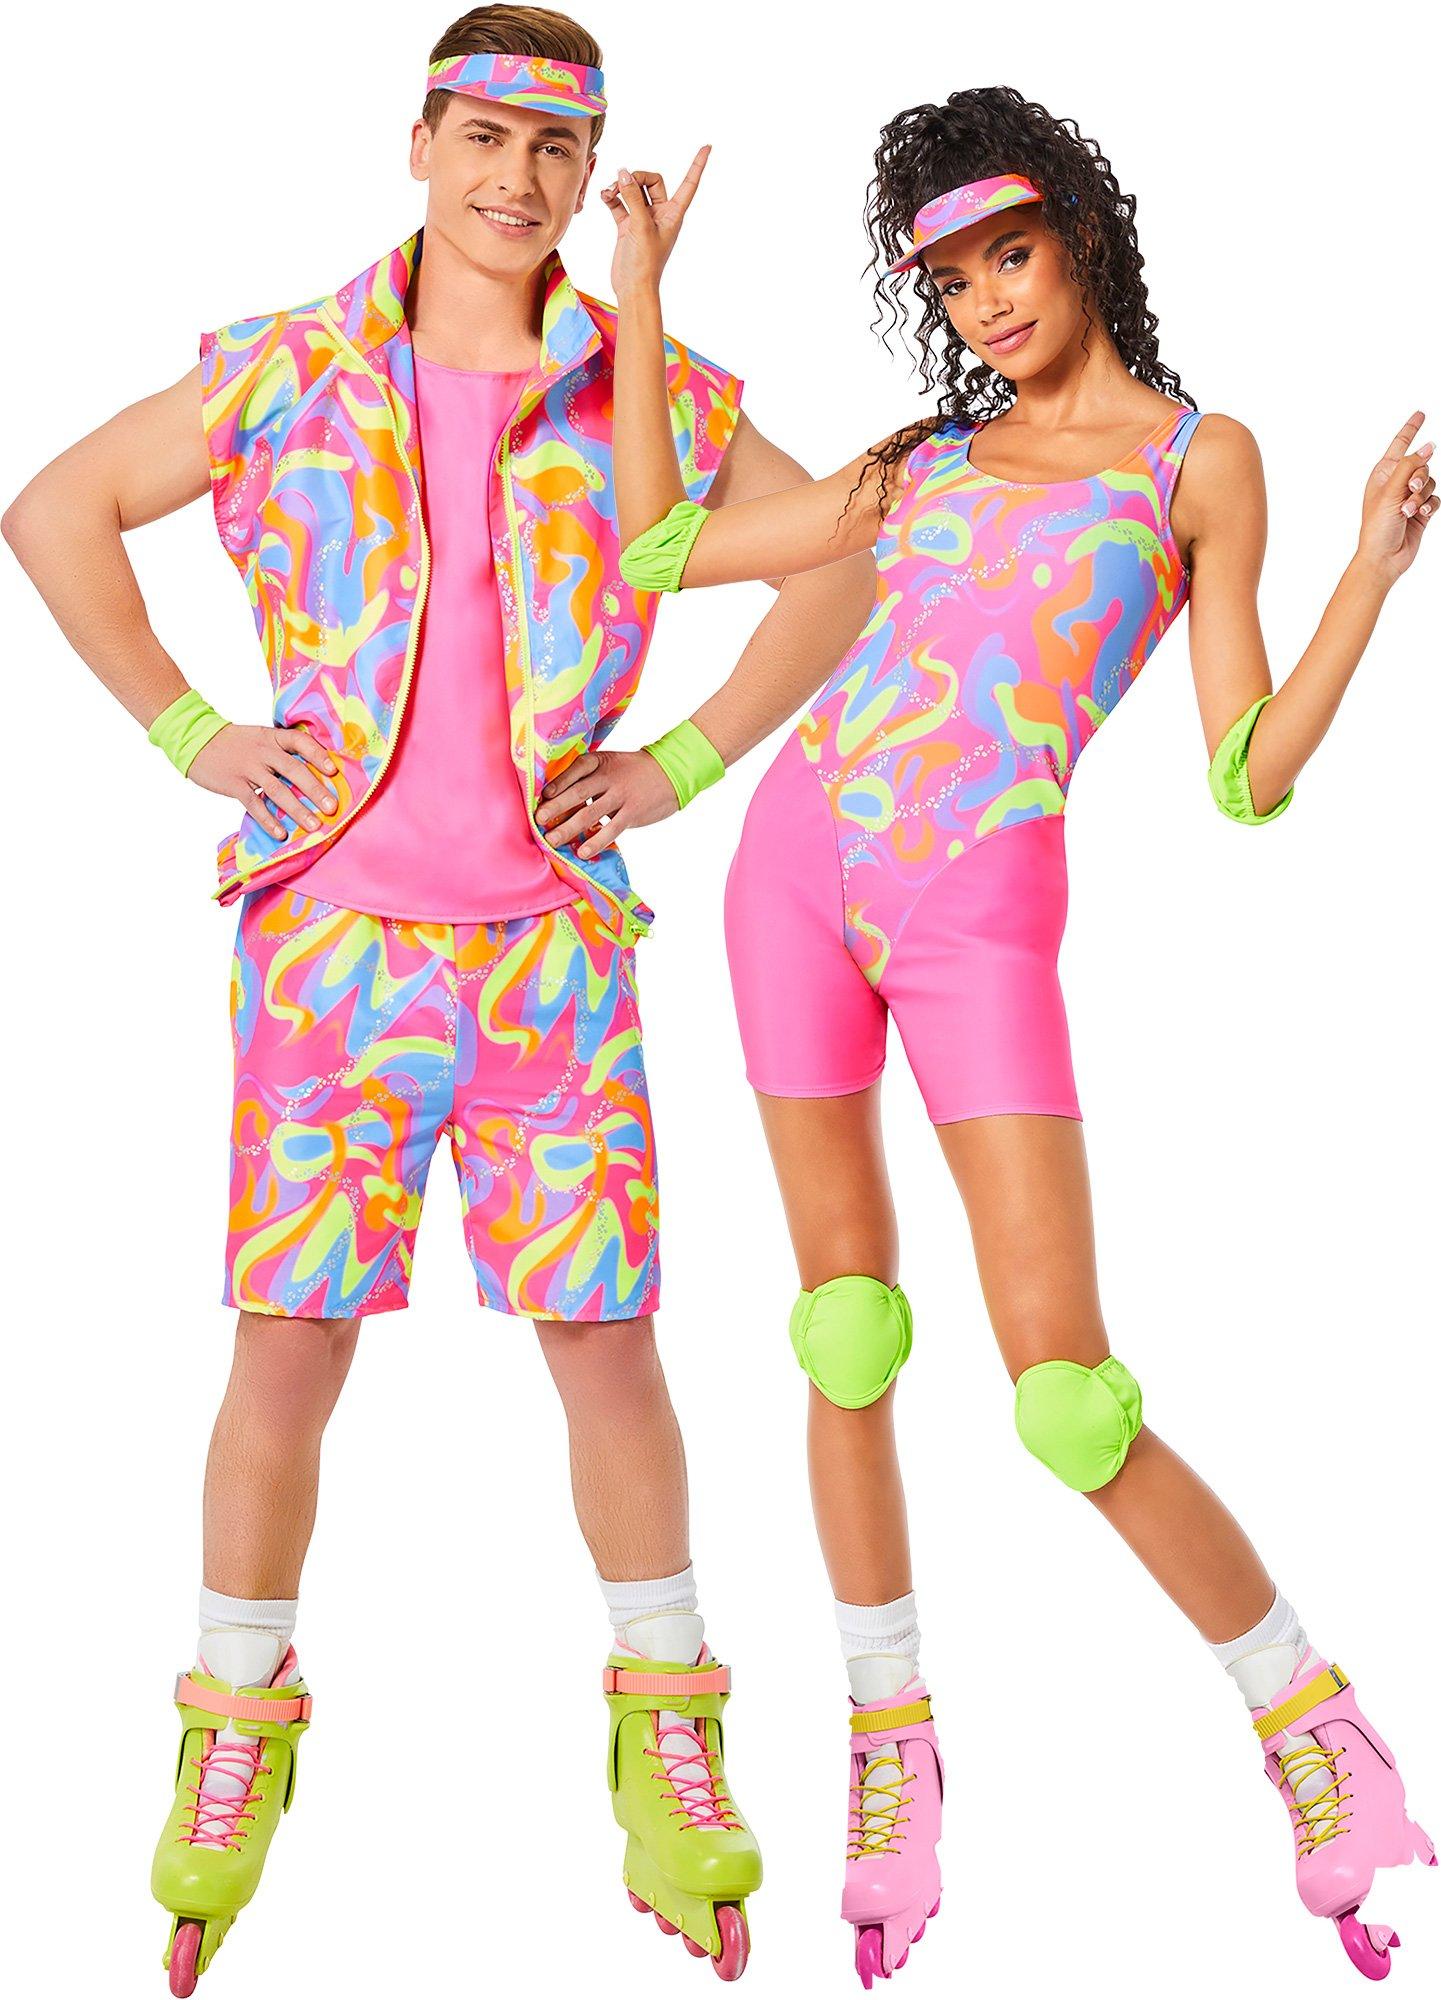 Barbie Halloween Costumes | Party City